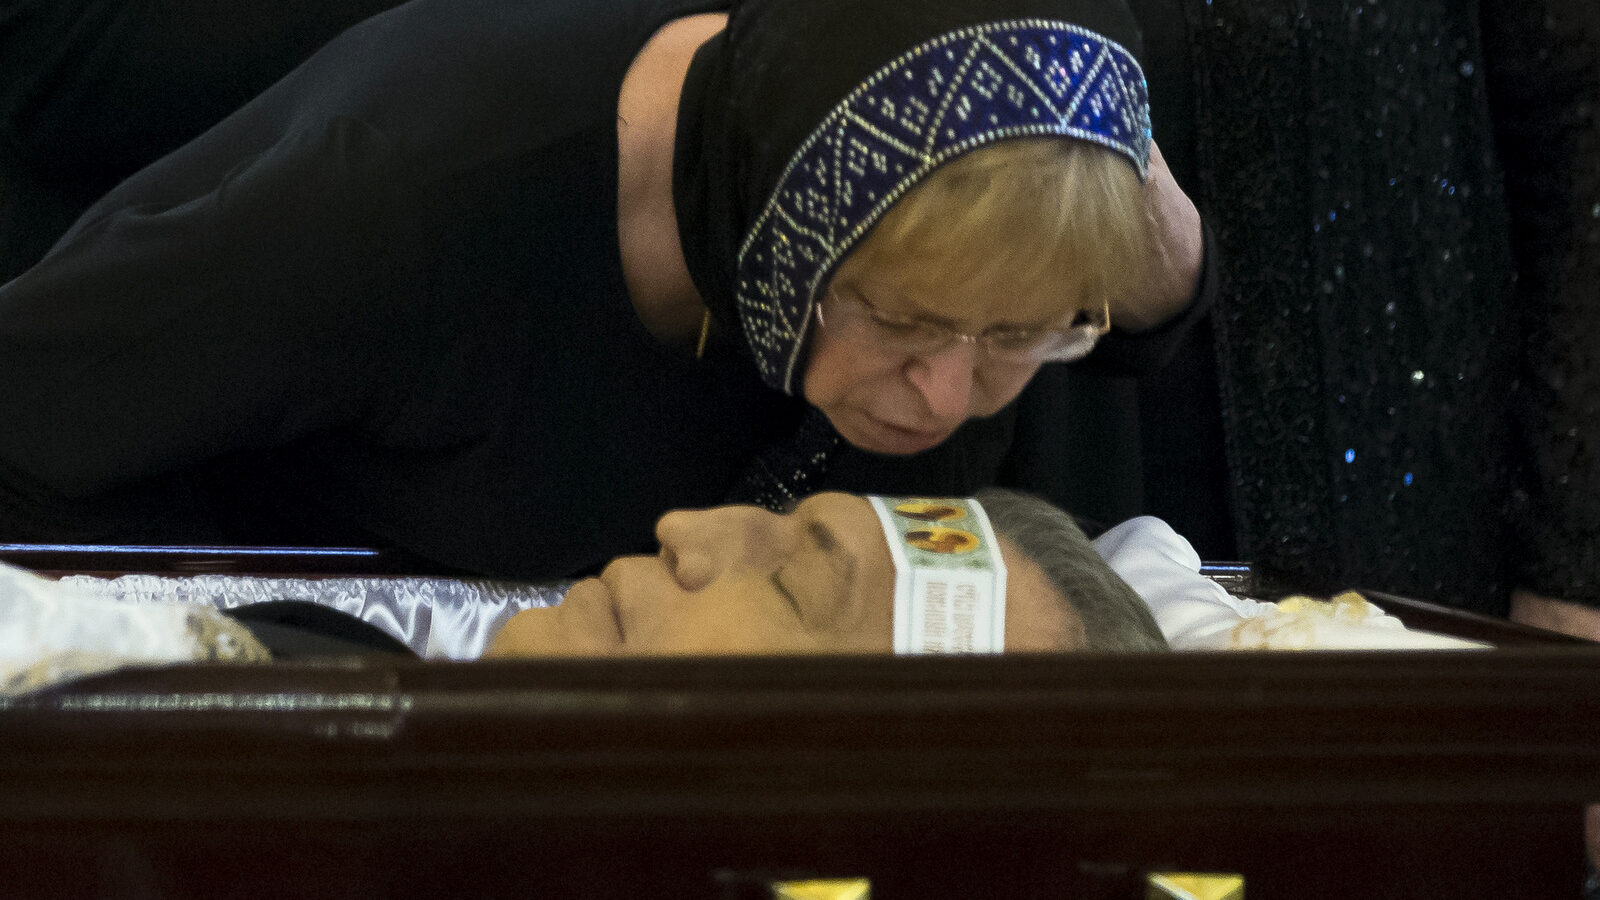 The widow of Andrei Karlov Marina kisses her husband during a religious service for killed Russian ambassador to Turkey, Andrei Karlov inside the Christ the Saviour Cathedral in Moscow, Russia, Thursday, Dec. 22, 2016.(AP/Alexander Zemlianichenko)